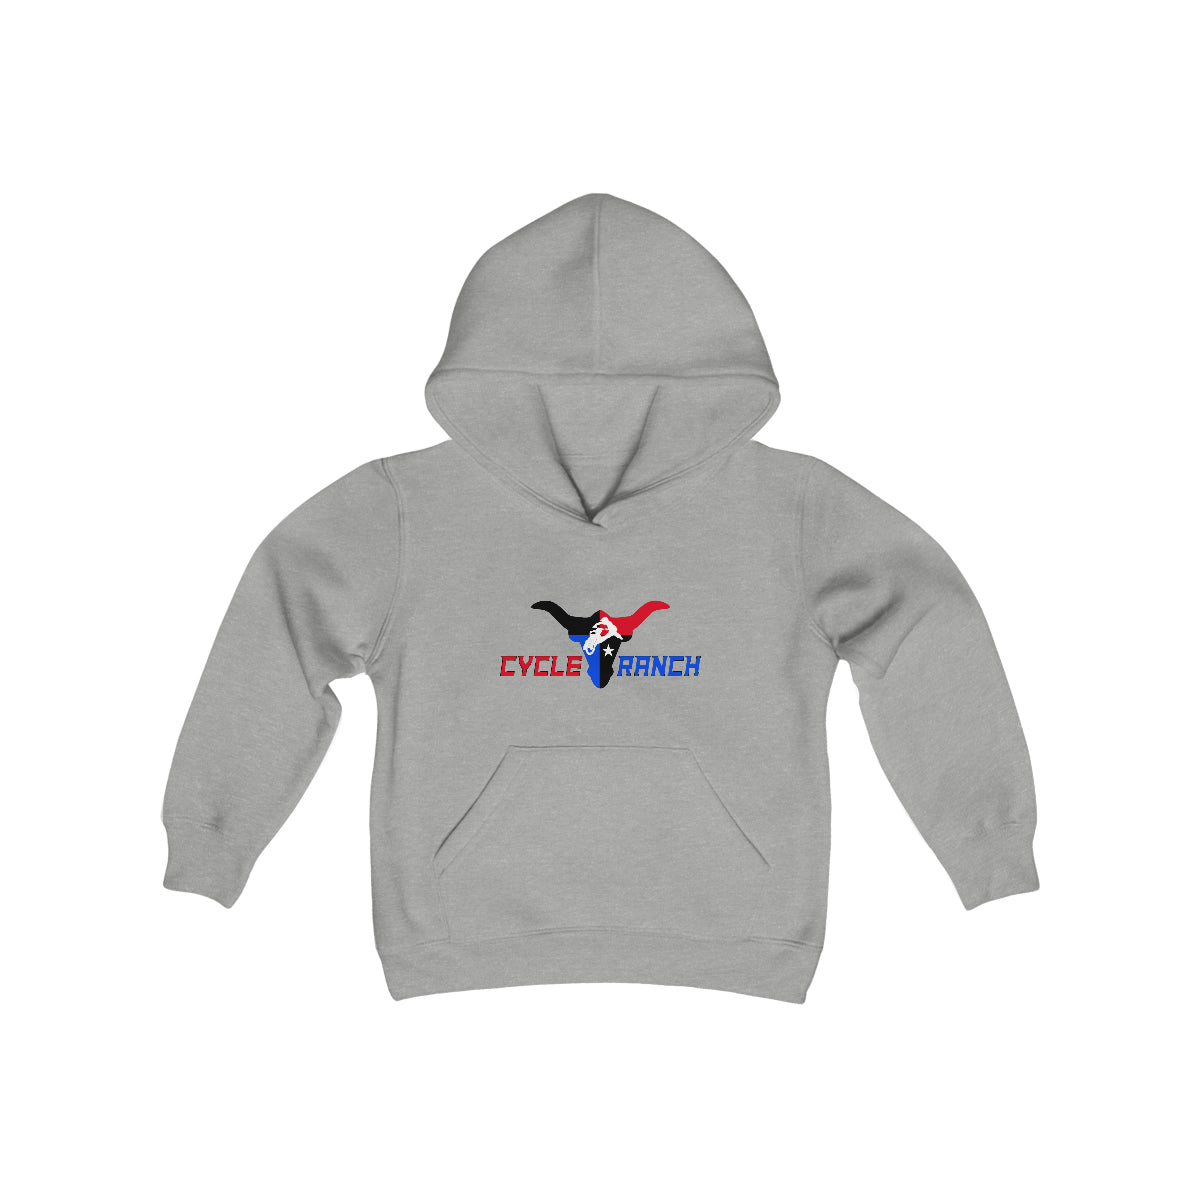 CYCLE RANCH YOUTH HOODIE - HEAVY BLEND